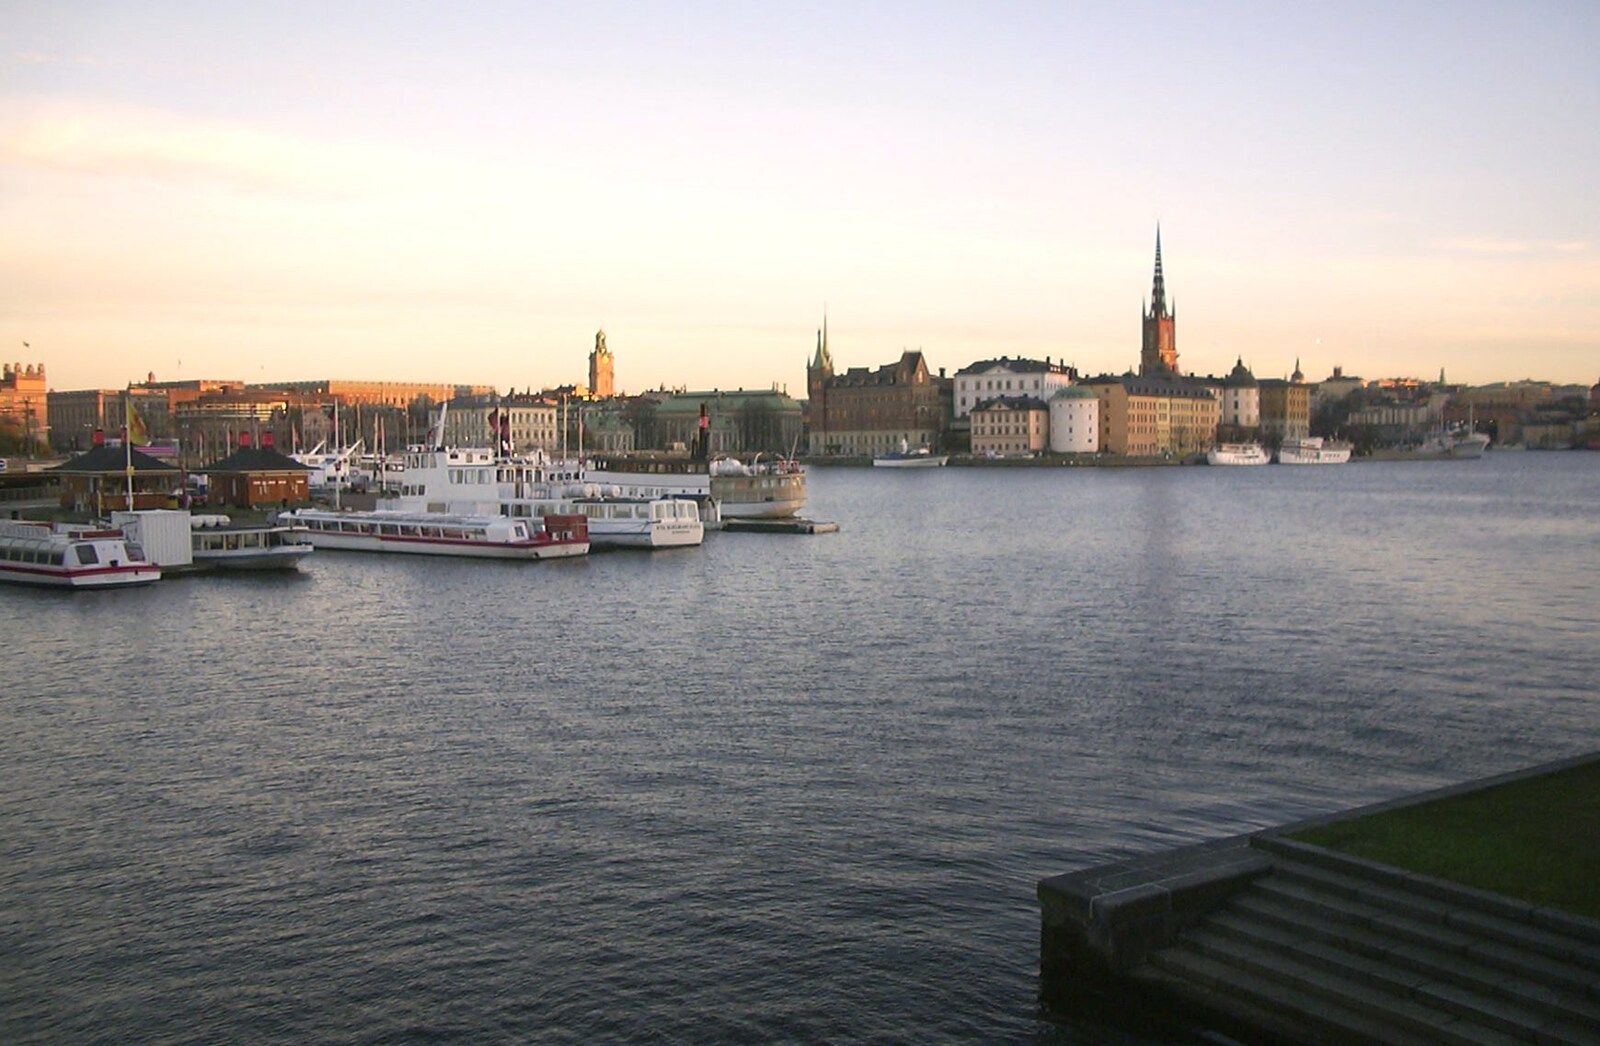 A Stockholm river scene from A 3G Lab Press Tour of Helsinki and Stockholm, Finland and Sweden - 12th March 2001